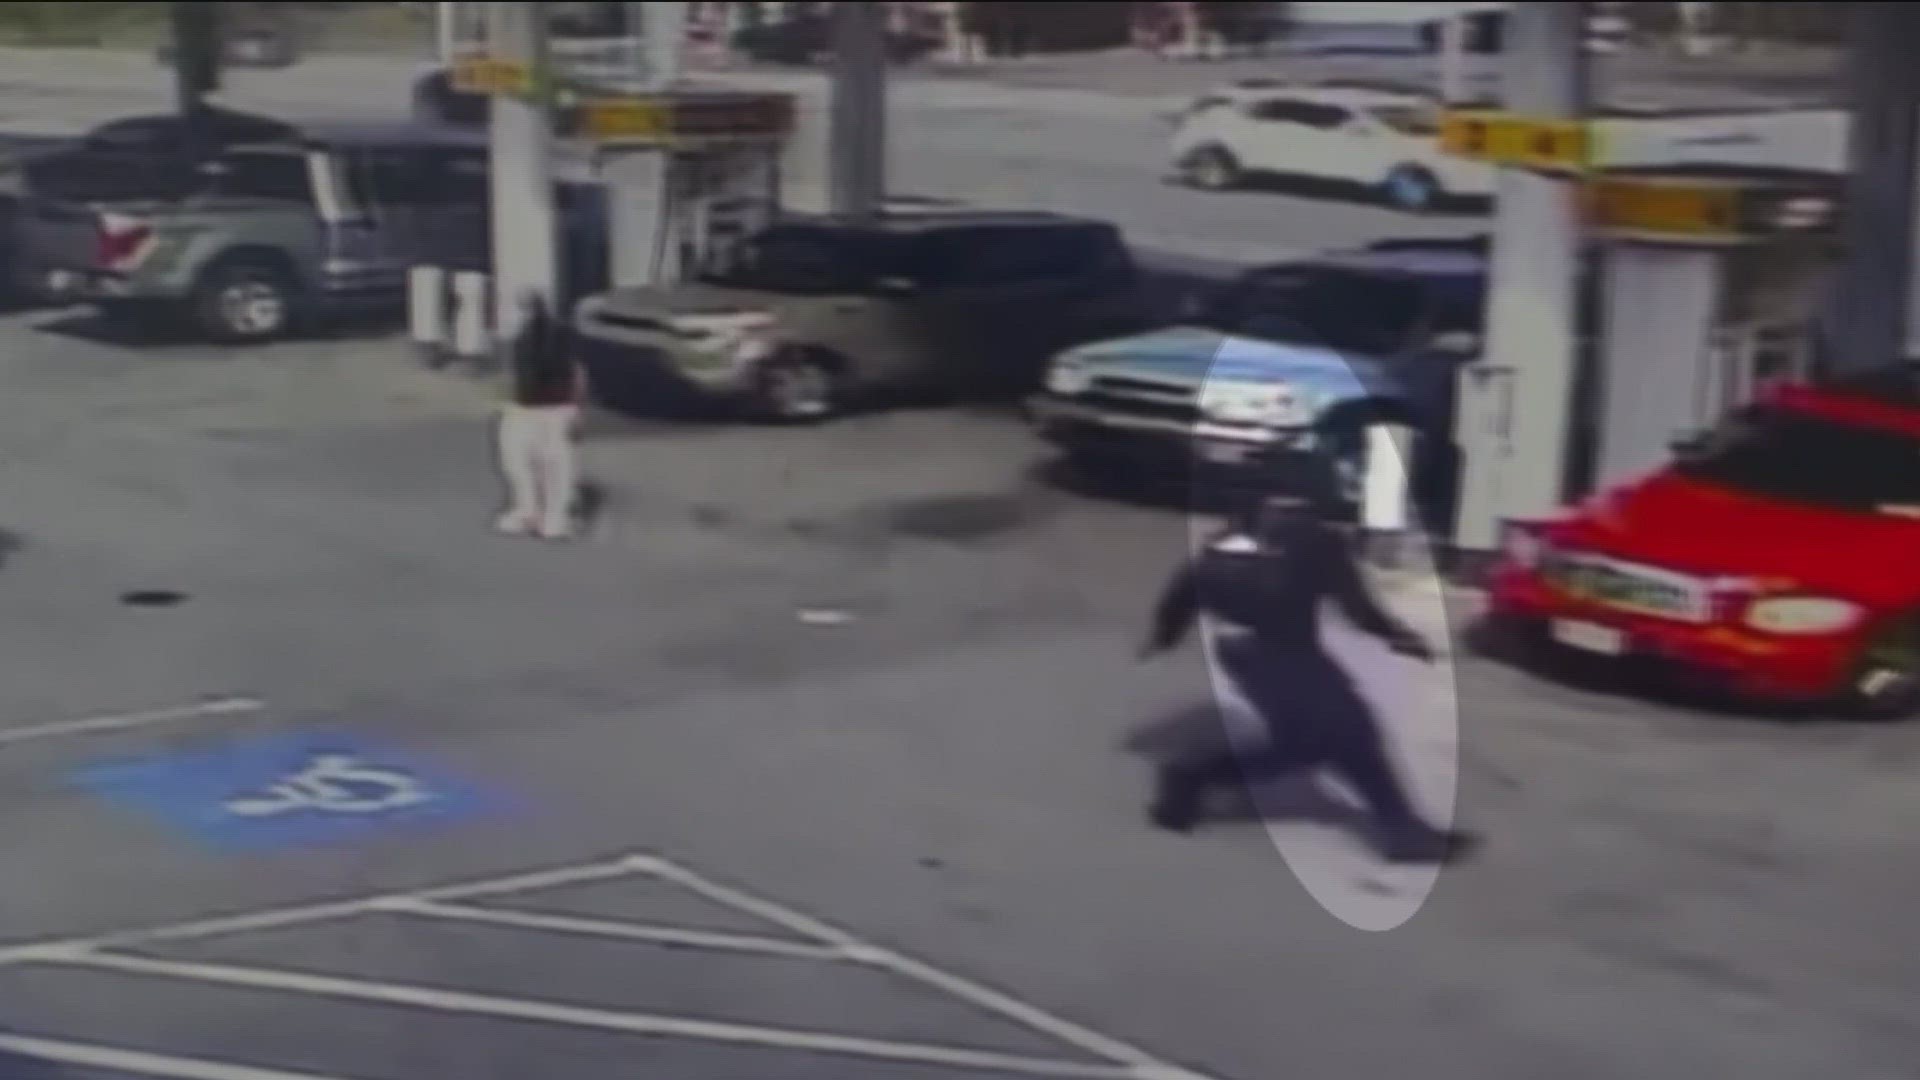 New footage shows moments leading up to the shooting that killed a 22-year-old man in Southeast Atlanta.